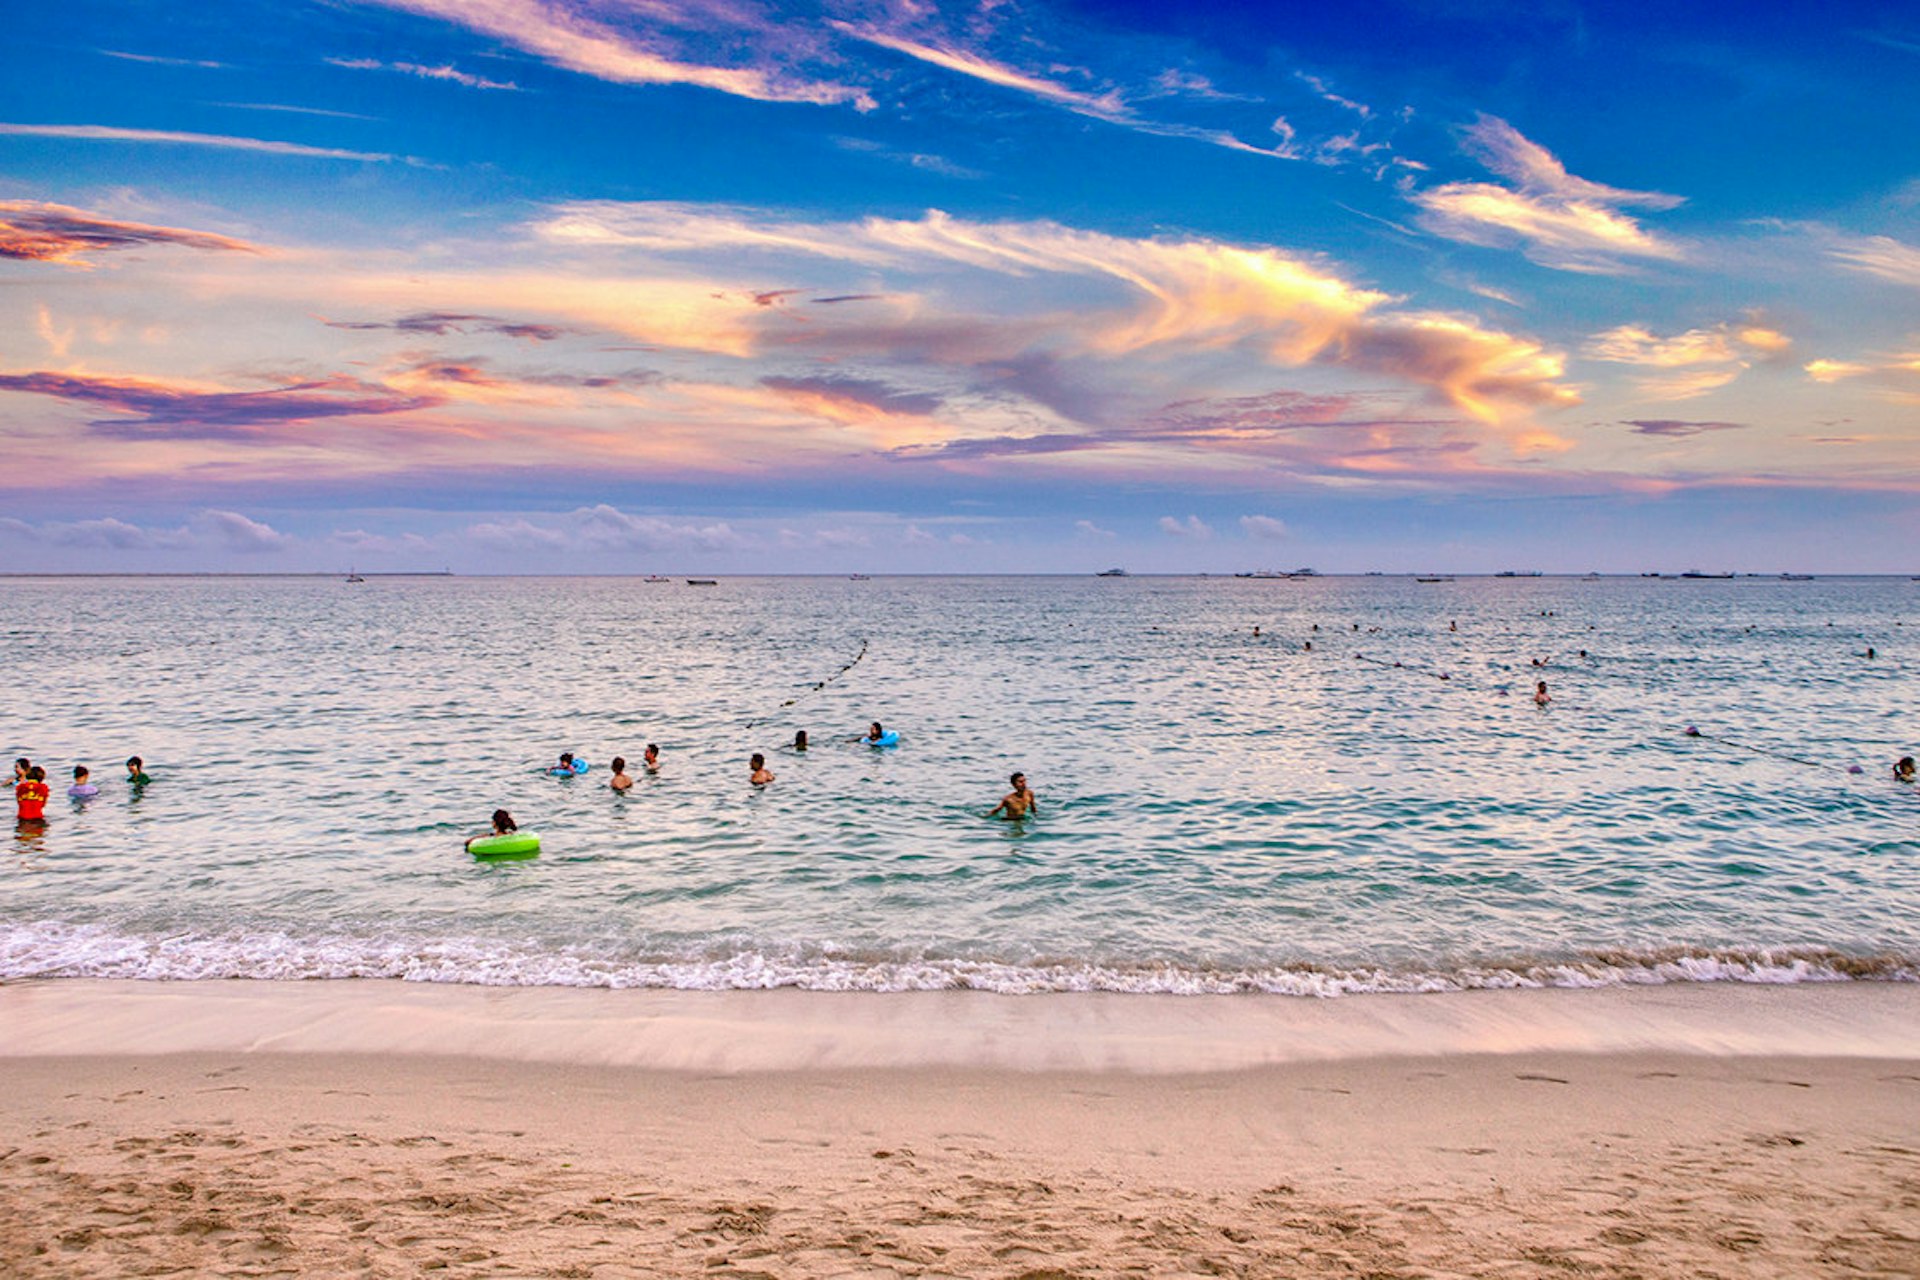 Sugary sands and pink sunsets on Hainan. Image by See-ming Lee / CC BY 2.0